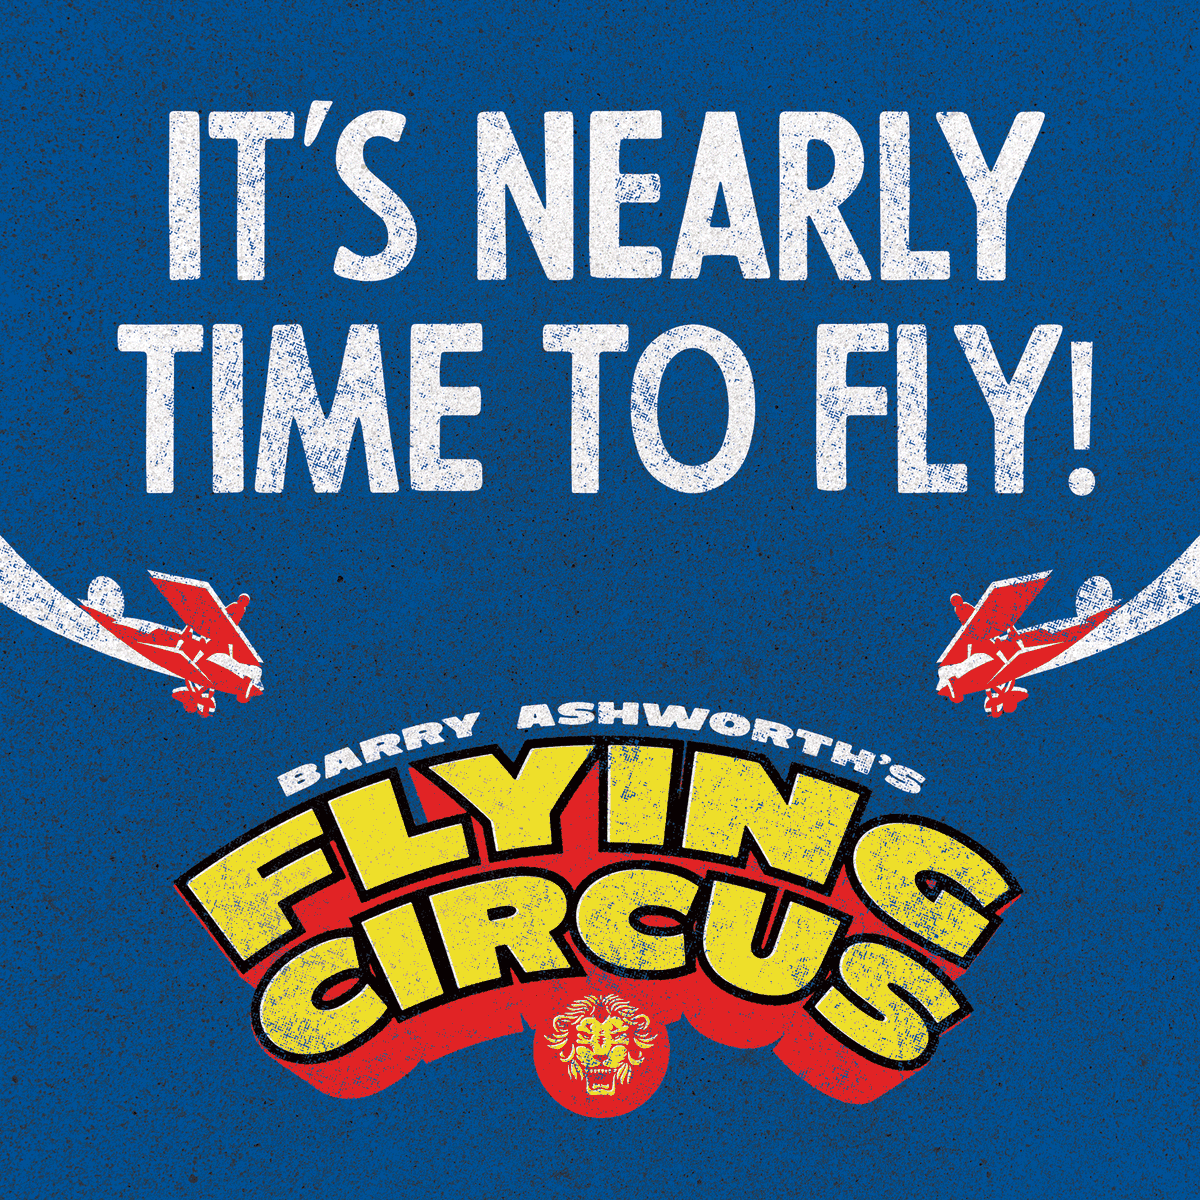 This Thursday see's the return of Barry's Flying Circus raising funds for Tonic Music.
Find out more @ tonicmusic.co.uk/post/bfc24
#MentalHealth #Music #Tonic
#NeverMindTheStigma #TonicRider #Wellbeing